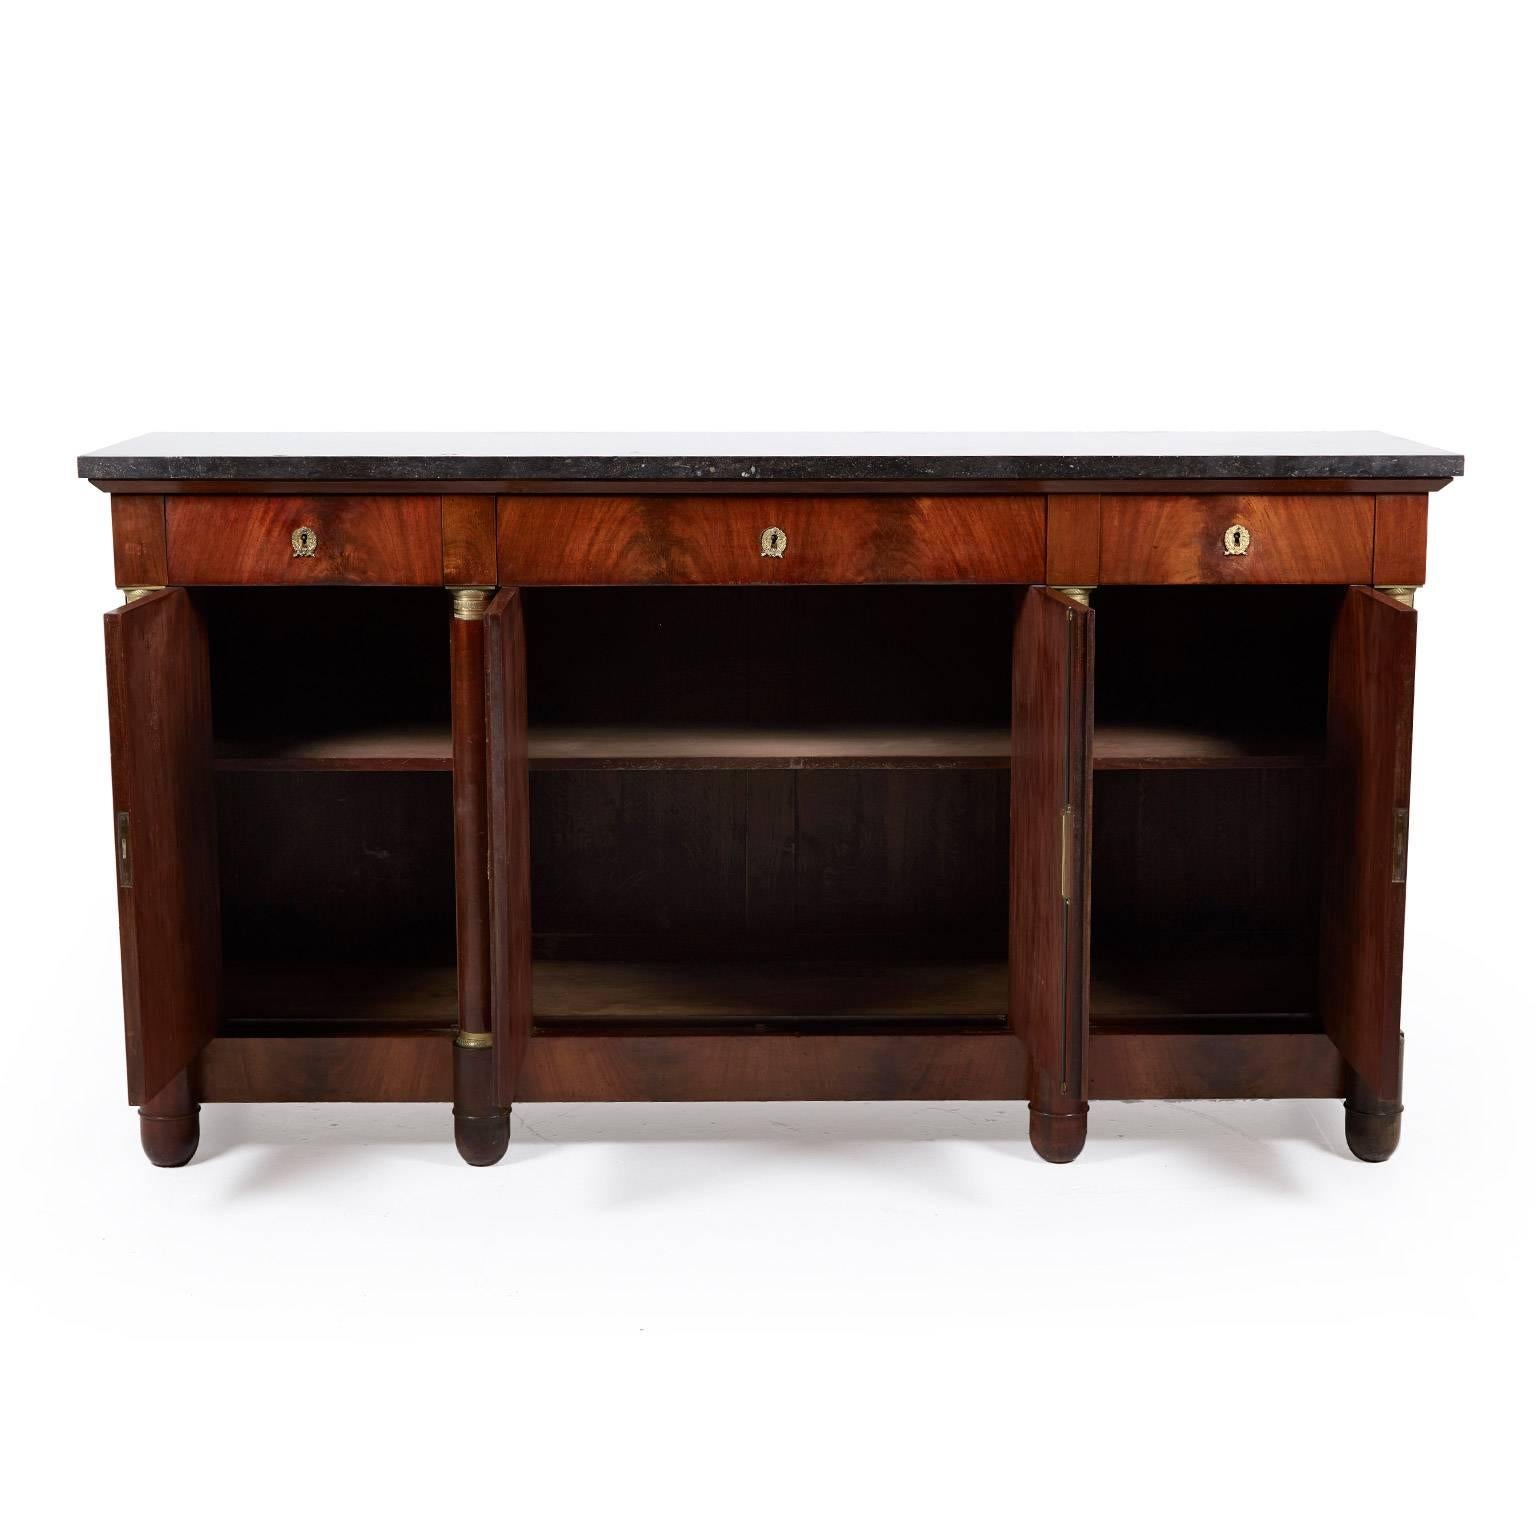 Antique Empire-style mahogany sideboard with columns and marble top, circa 1910. With lovely brass accents, the marble enhances the richness of the mahogany patina.




          